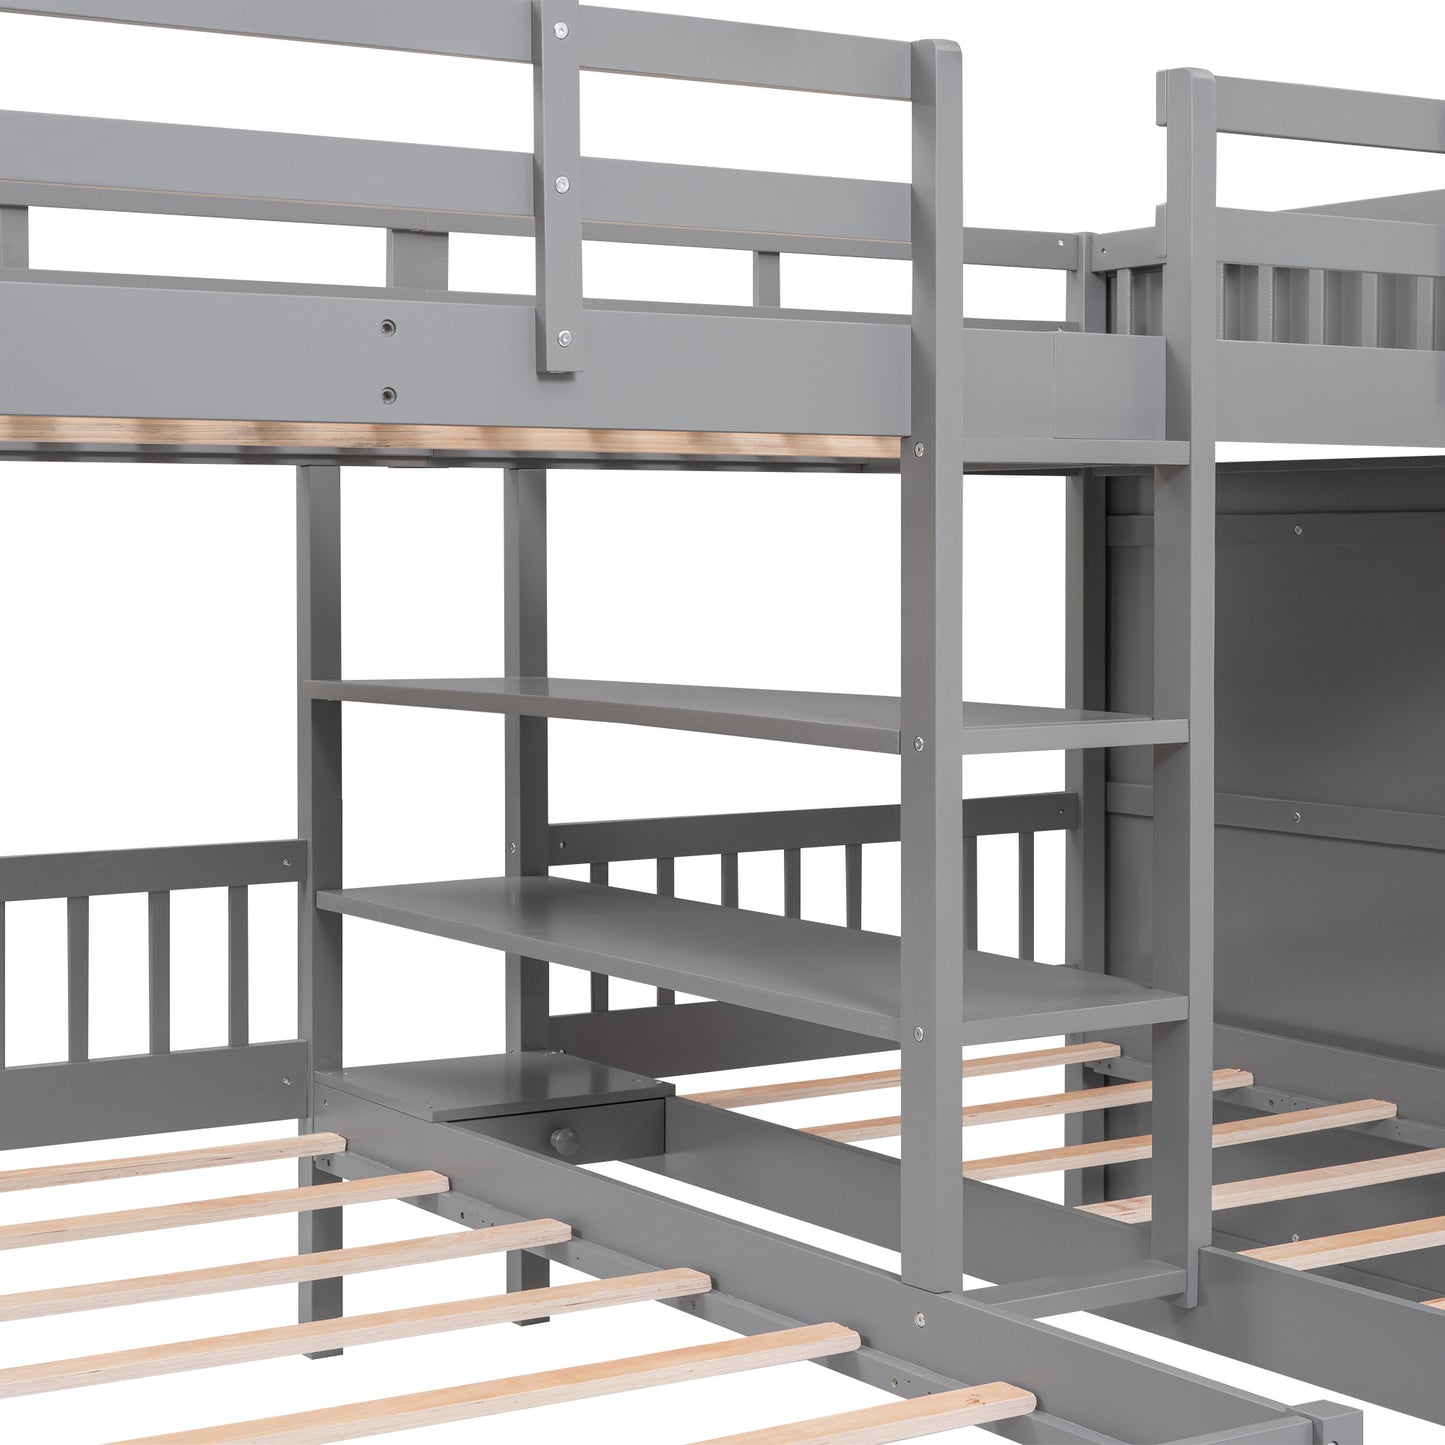 Full-Over-Twin-Twin Bunk Bed with Shelves, Wardrobe and Mirror, Gray